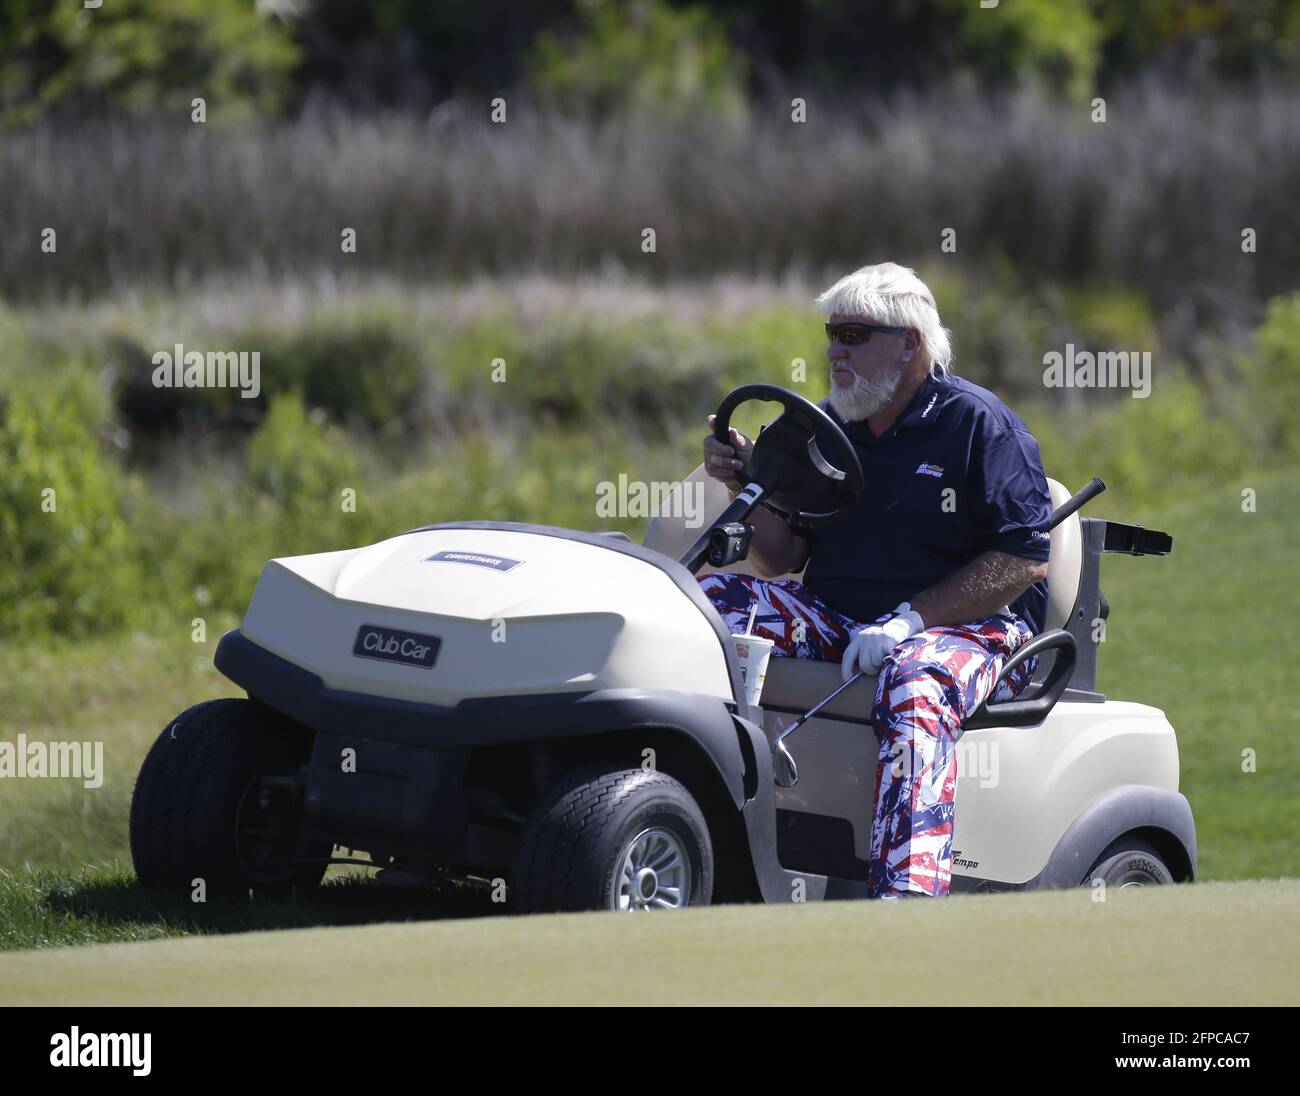 Kiawah Island, United States. 20th May, 2021. John Daly rides his golf cart  on the back 9 in the first round of the 103rd PGA Championship at Kiawah  Island Golf Resort Ocean